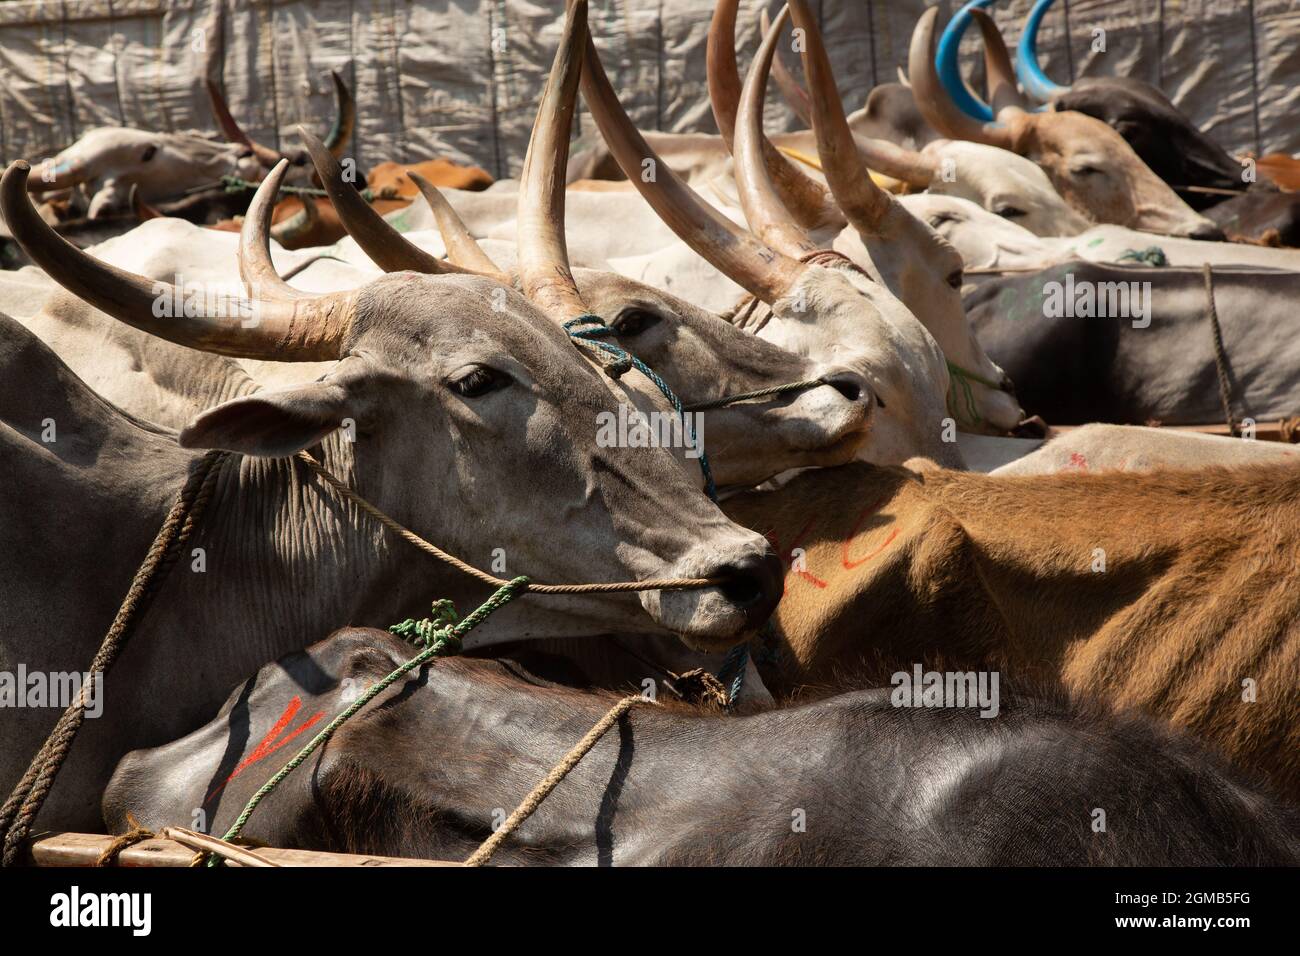 Many cattle stand closely on a brightly painted flatbed truck in India, tethered and being transported to a livestock market. Stock Photo